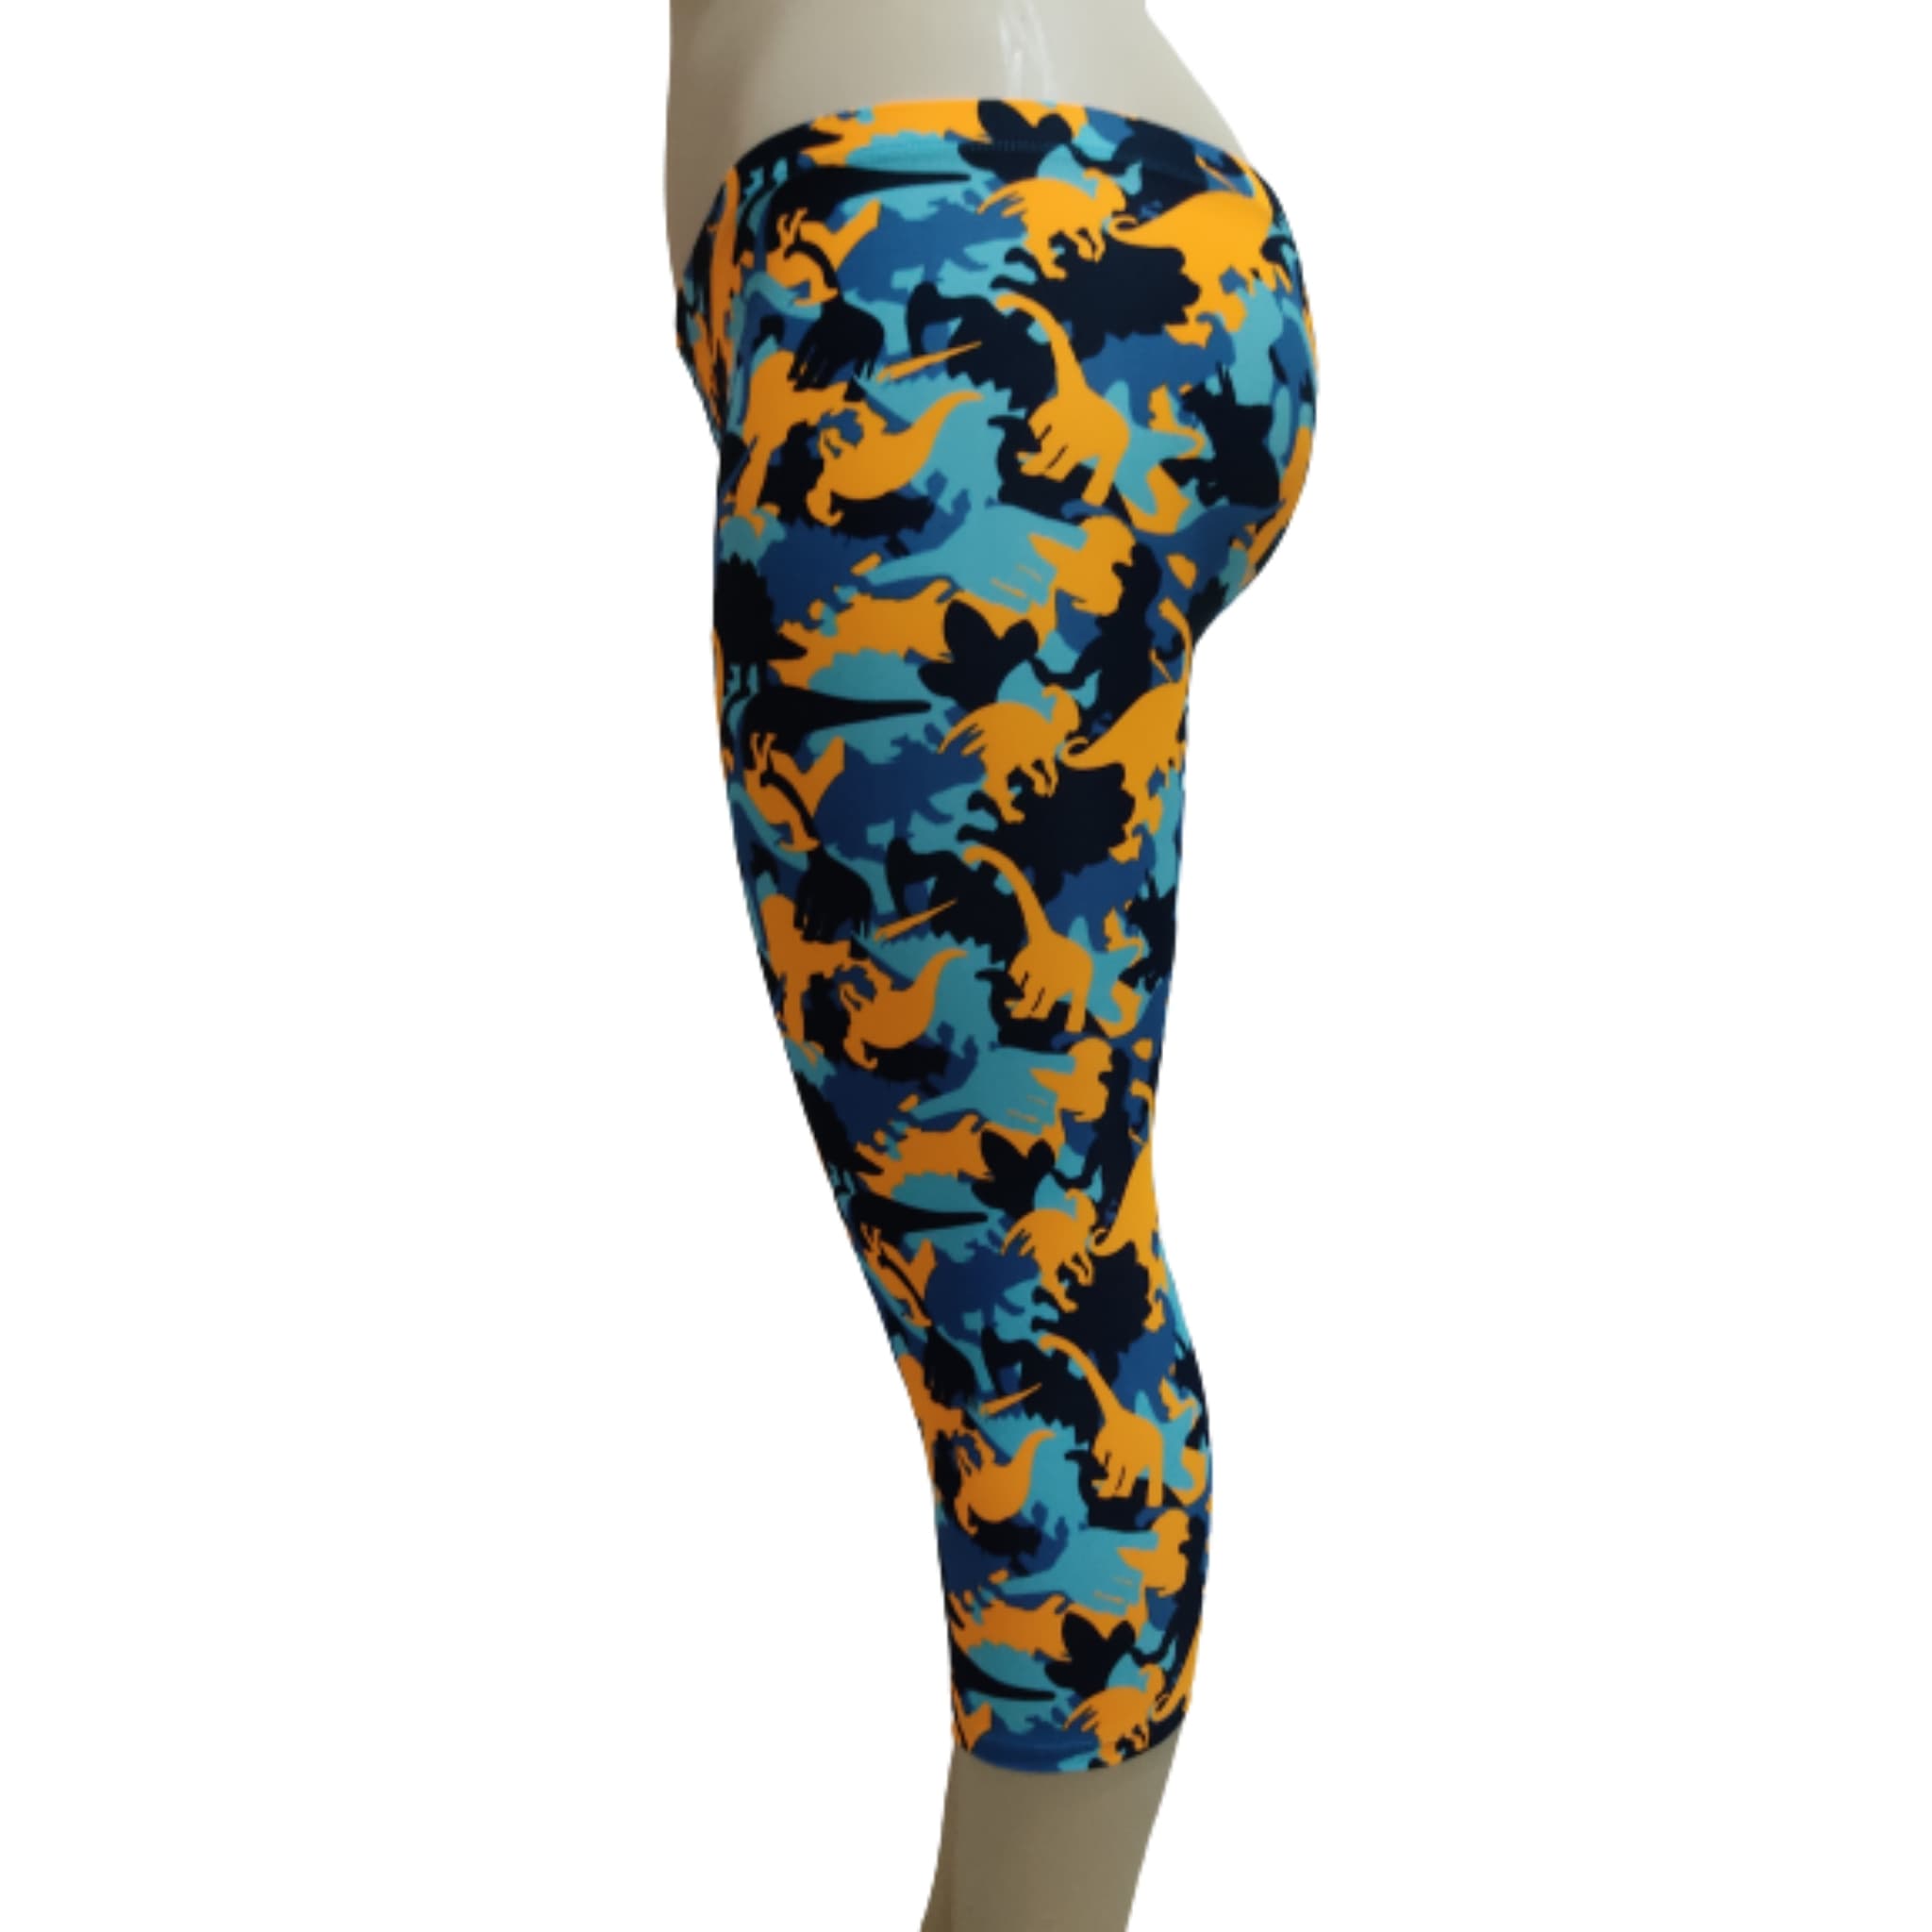 LEGGINGS CAMOUFLAGE SMALL AND PLUS SIZE, THICK NYLON SPAN, BY KE FASHION